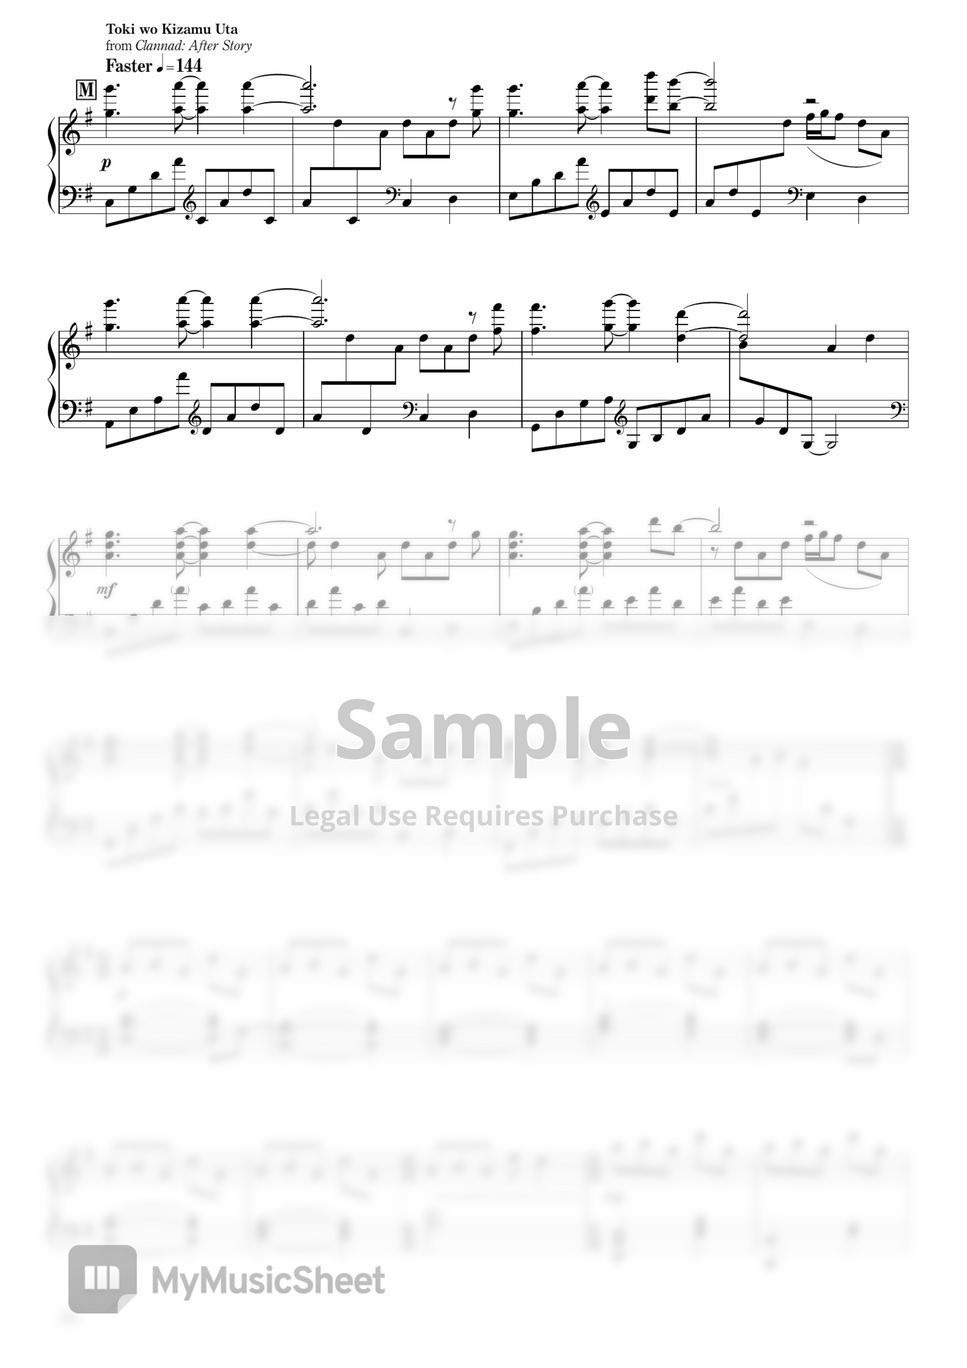 Clannad After Story Sheet Music Downloads at